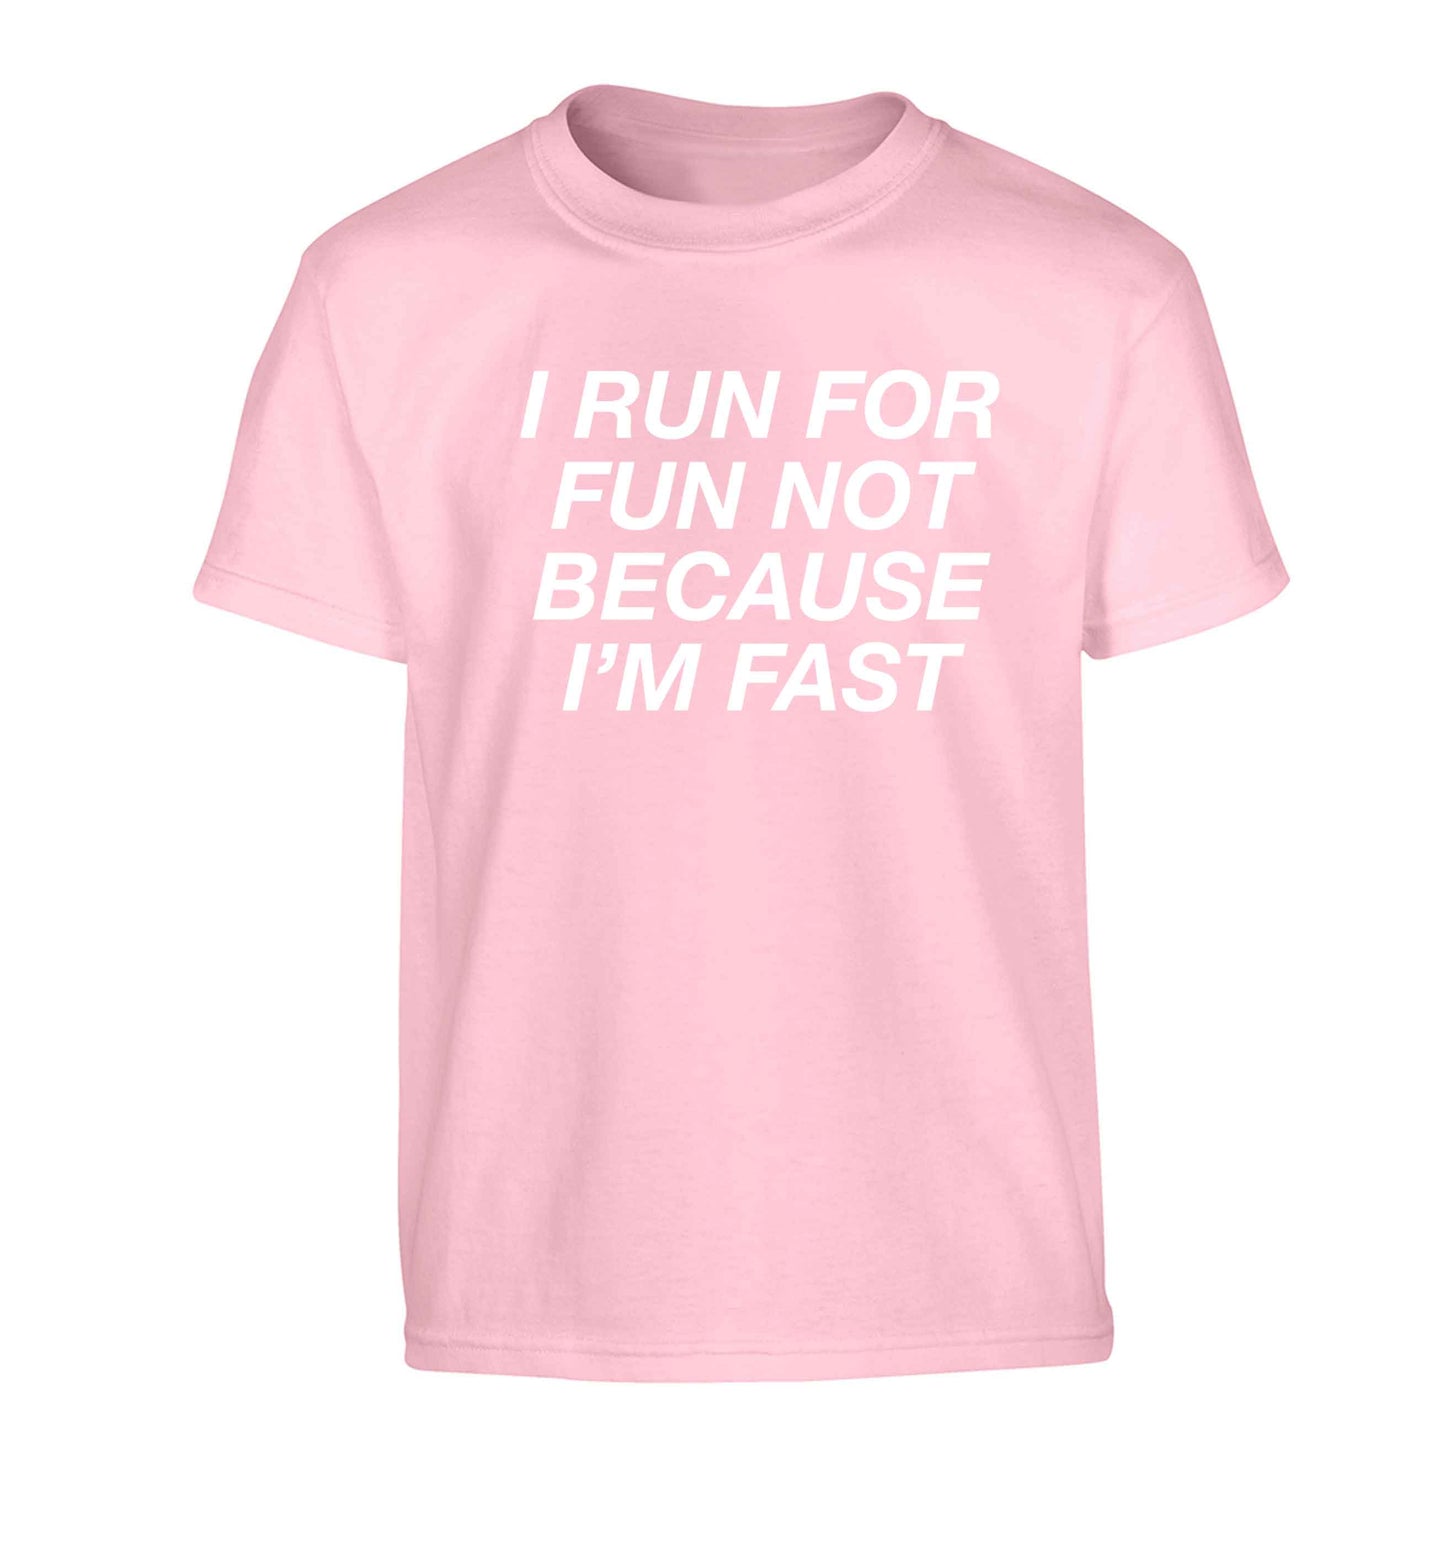 I run for fun not because I'm fast Children's light pink Tshirt 12-13 Years